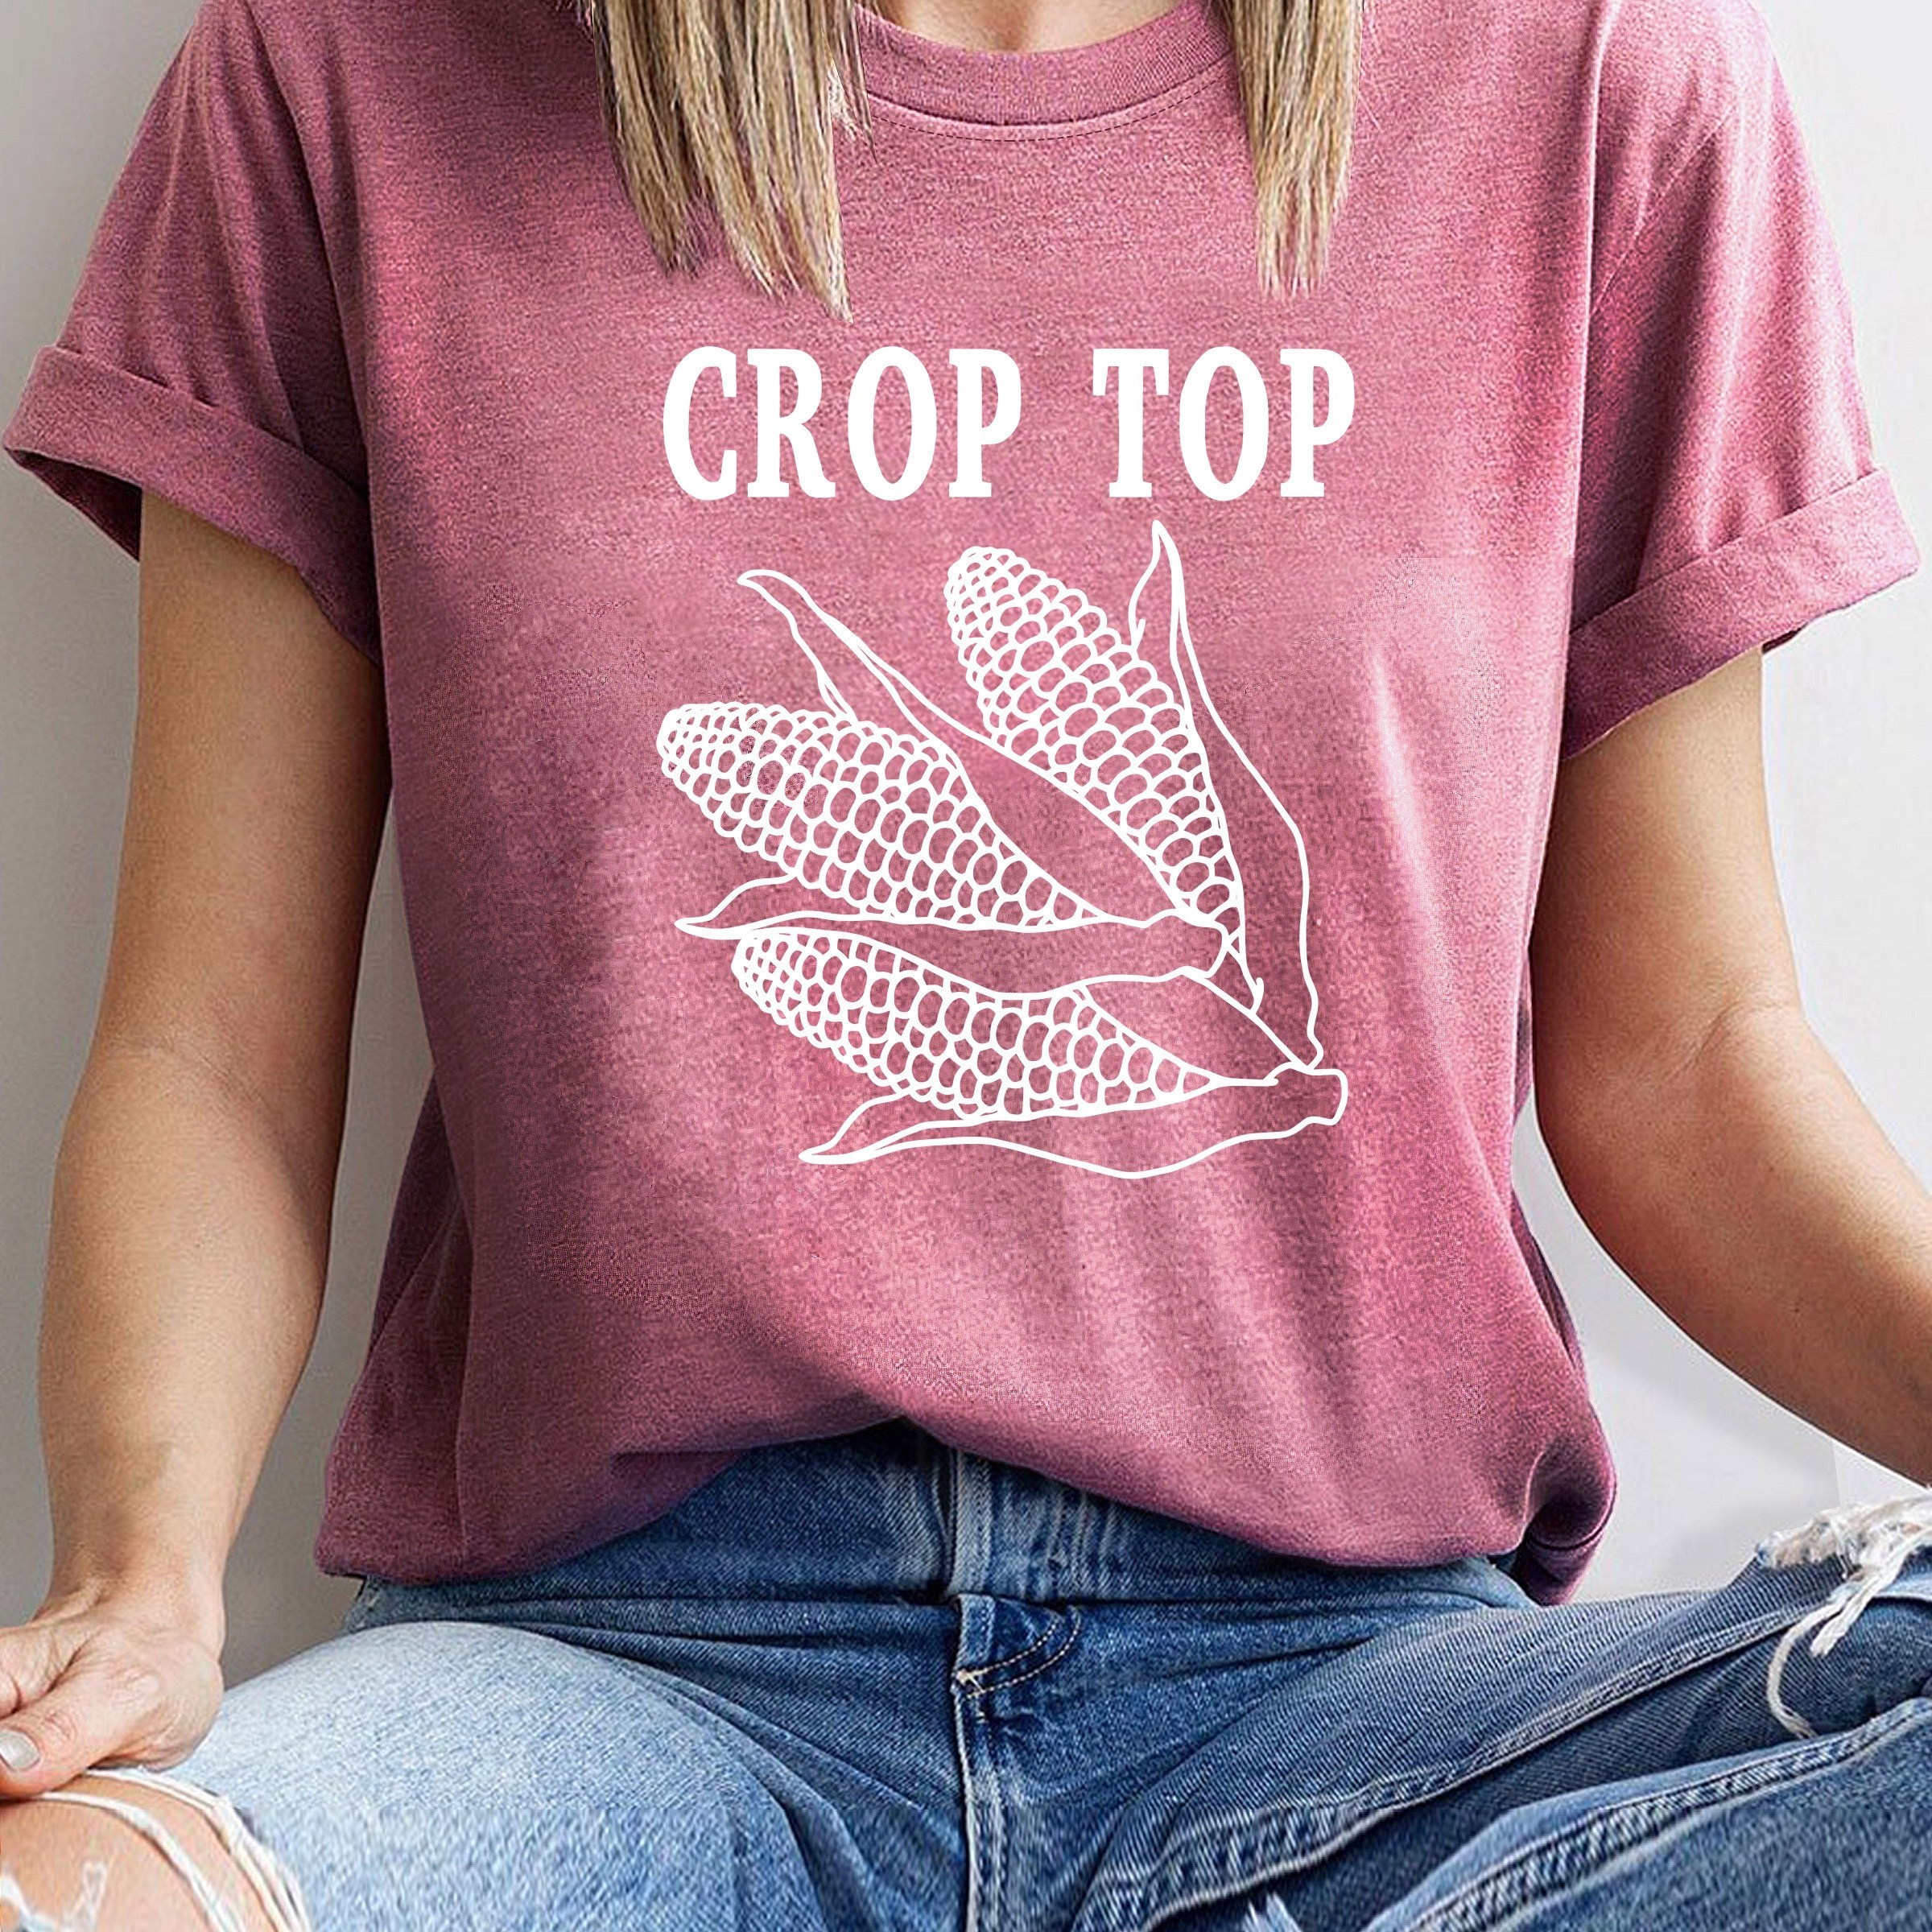 

Women's Crop Top T-shirt With Corn Print, Fashionable Vintage-inspired Casual Sporty Tee, Round Neck, Short Sleeve